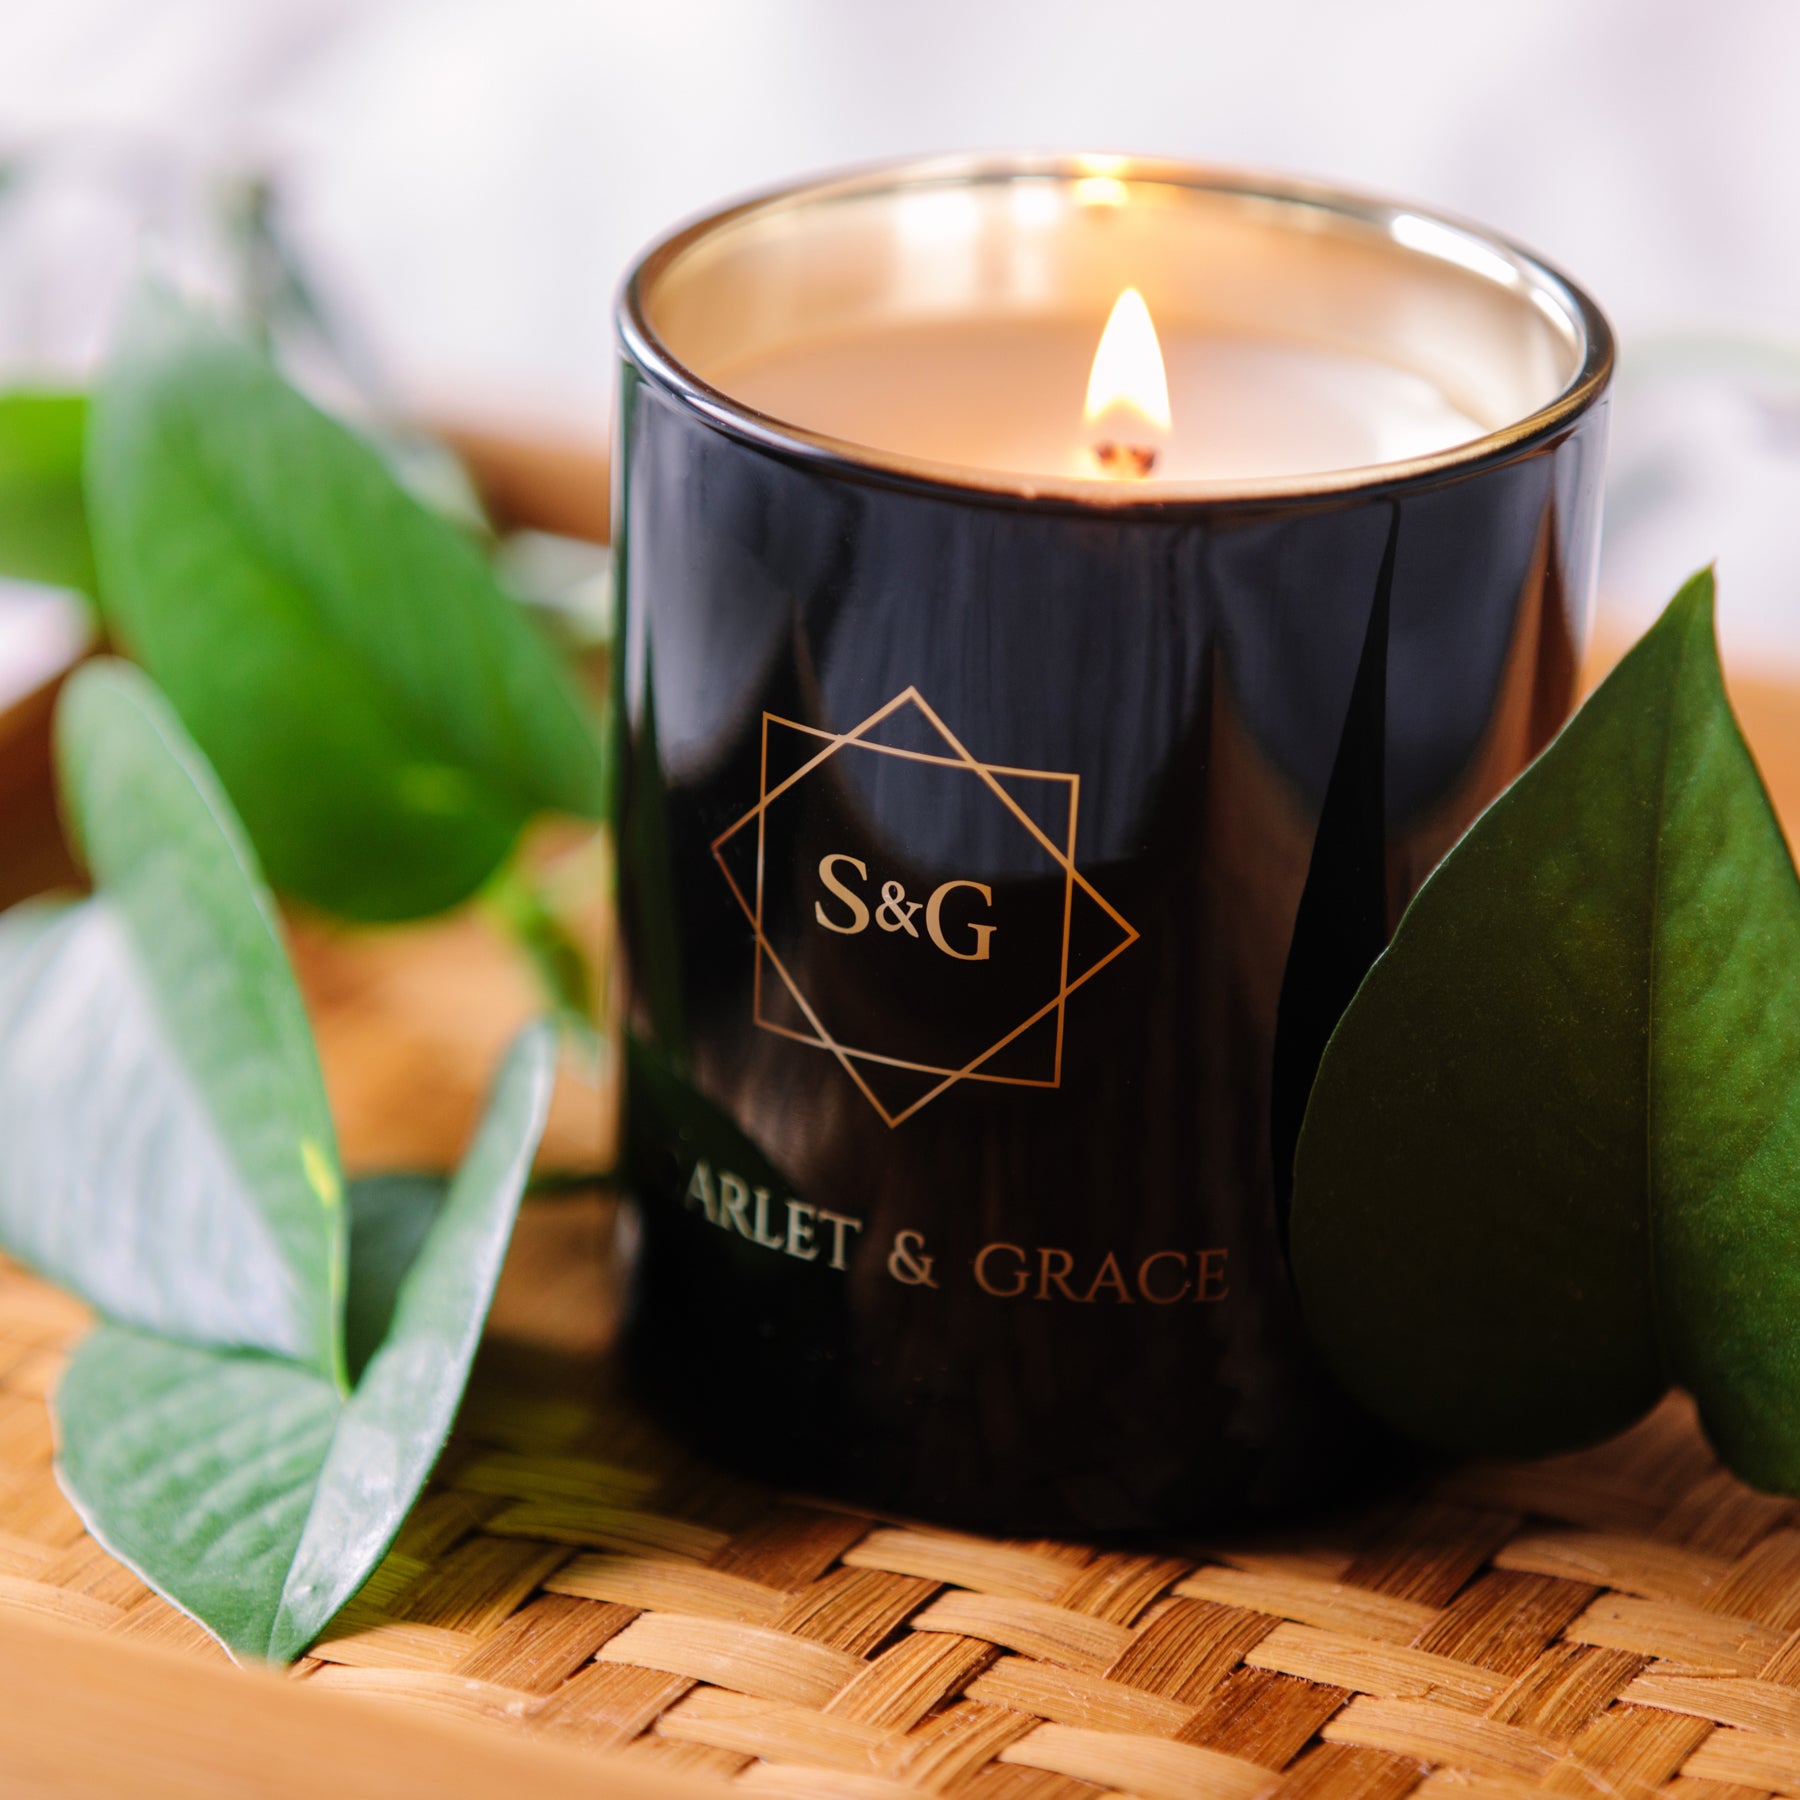 Fantasy - 340gm Soy Wax Candle - Scarlet & Grace